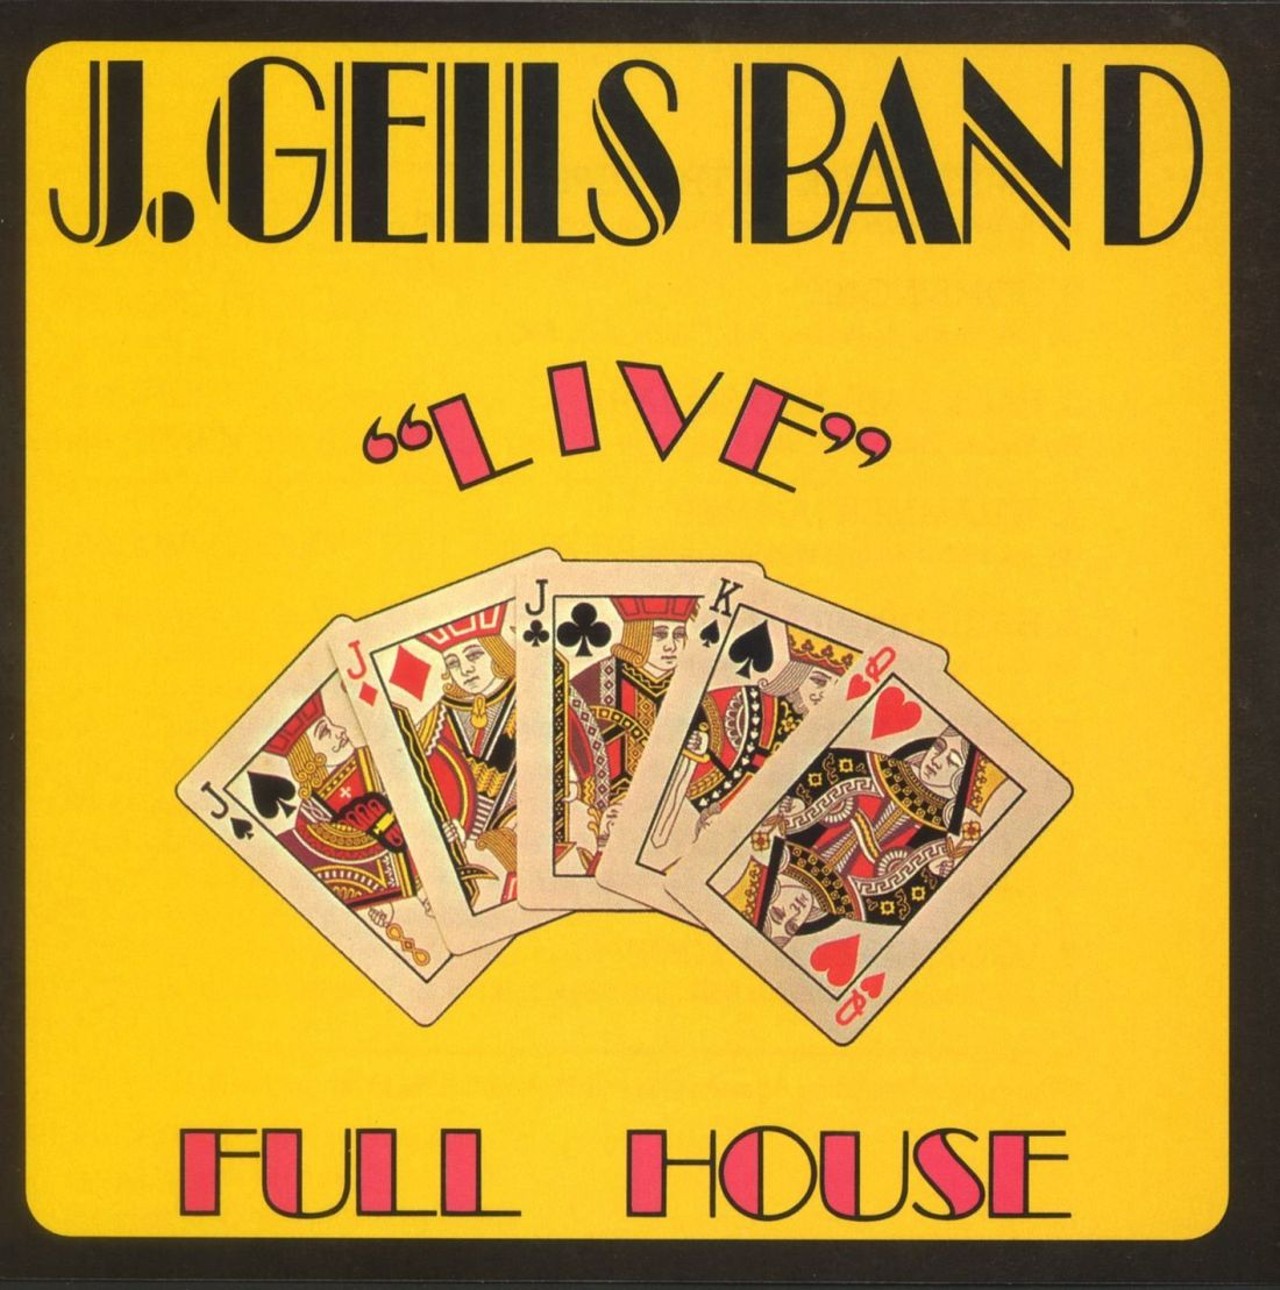 The J. Geils Band - &#147;Live Full House&#148; 
It should come as no surprise that a live album by the J. Geils band is recorded in Detroit, as the band had a huge following in Detroit and put out three live albums recorded here. But you might not have expected that trend to date back all the way to 1972. Another surprise is the venue, listed as the Cinderella Ballroom, which closed in 1975.